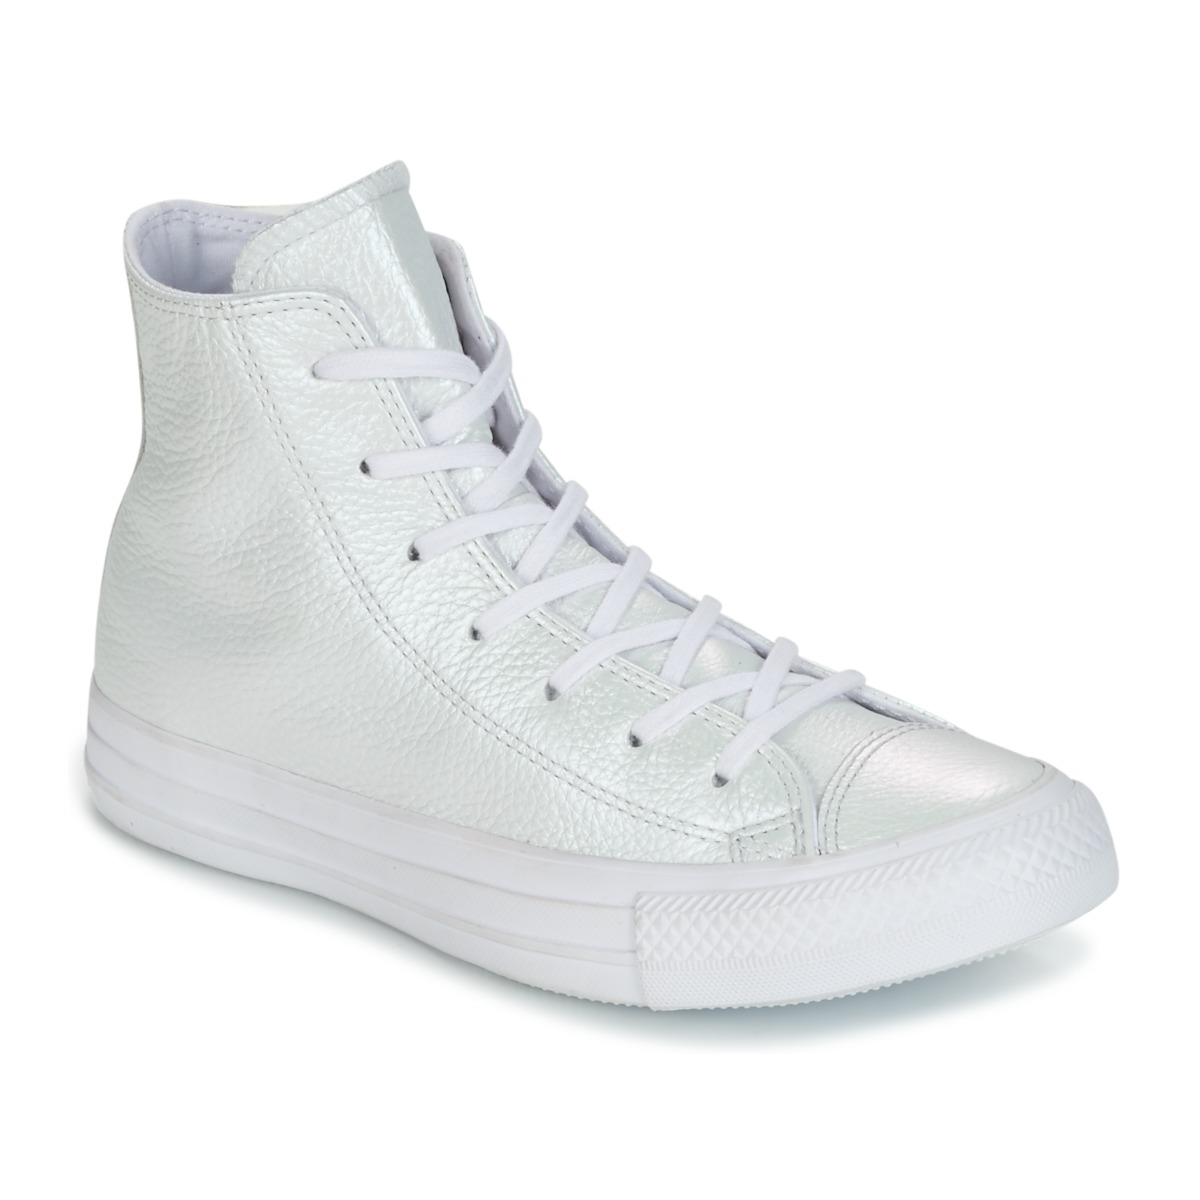 Kengät Converse CHUCK TAYLOR ALL STAR IRIDESCENT LEATHER HI IRIDESCENT LEATHER H 36